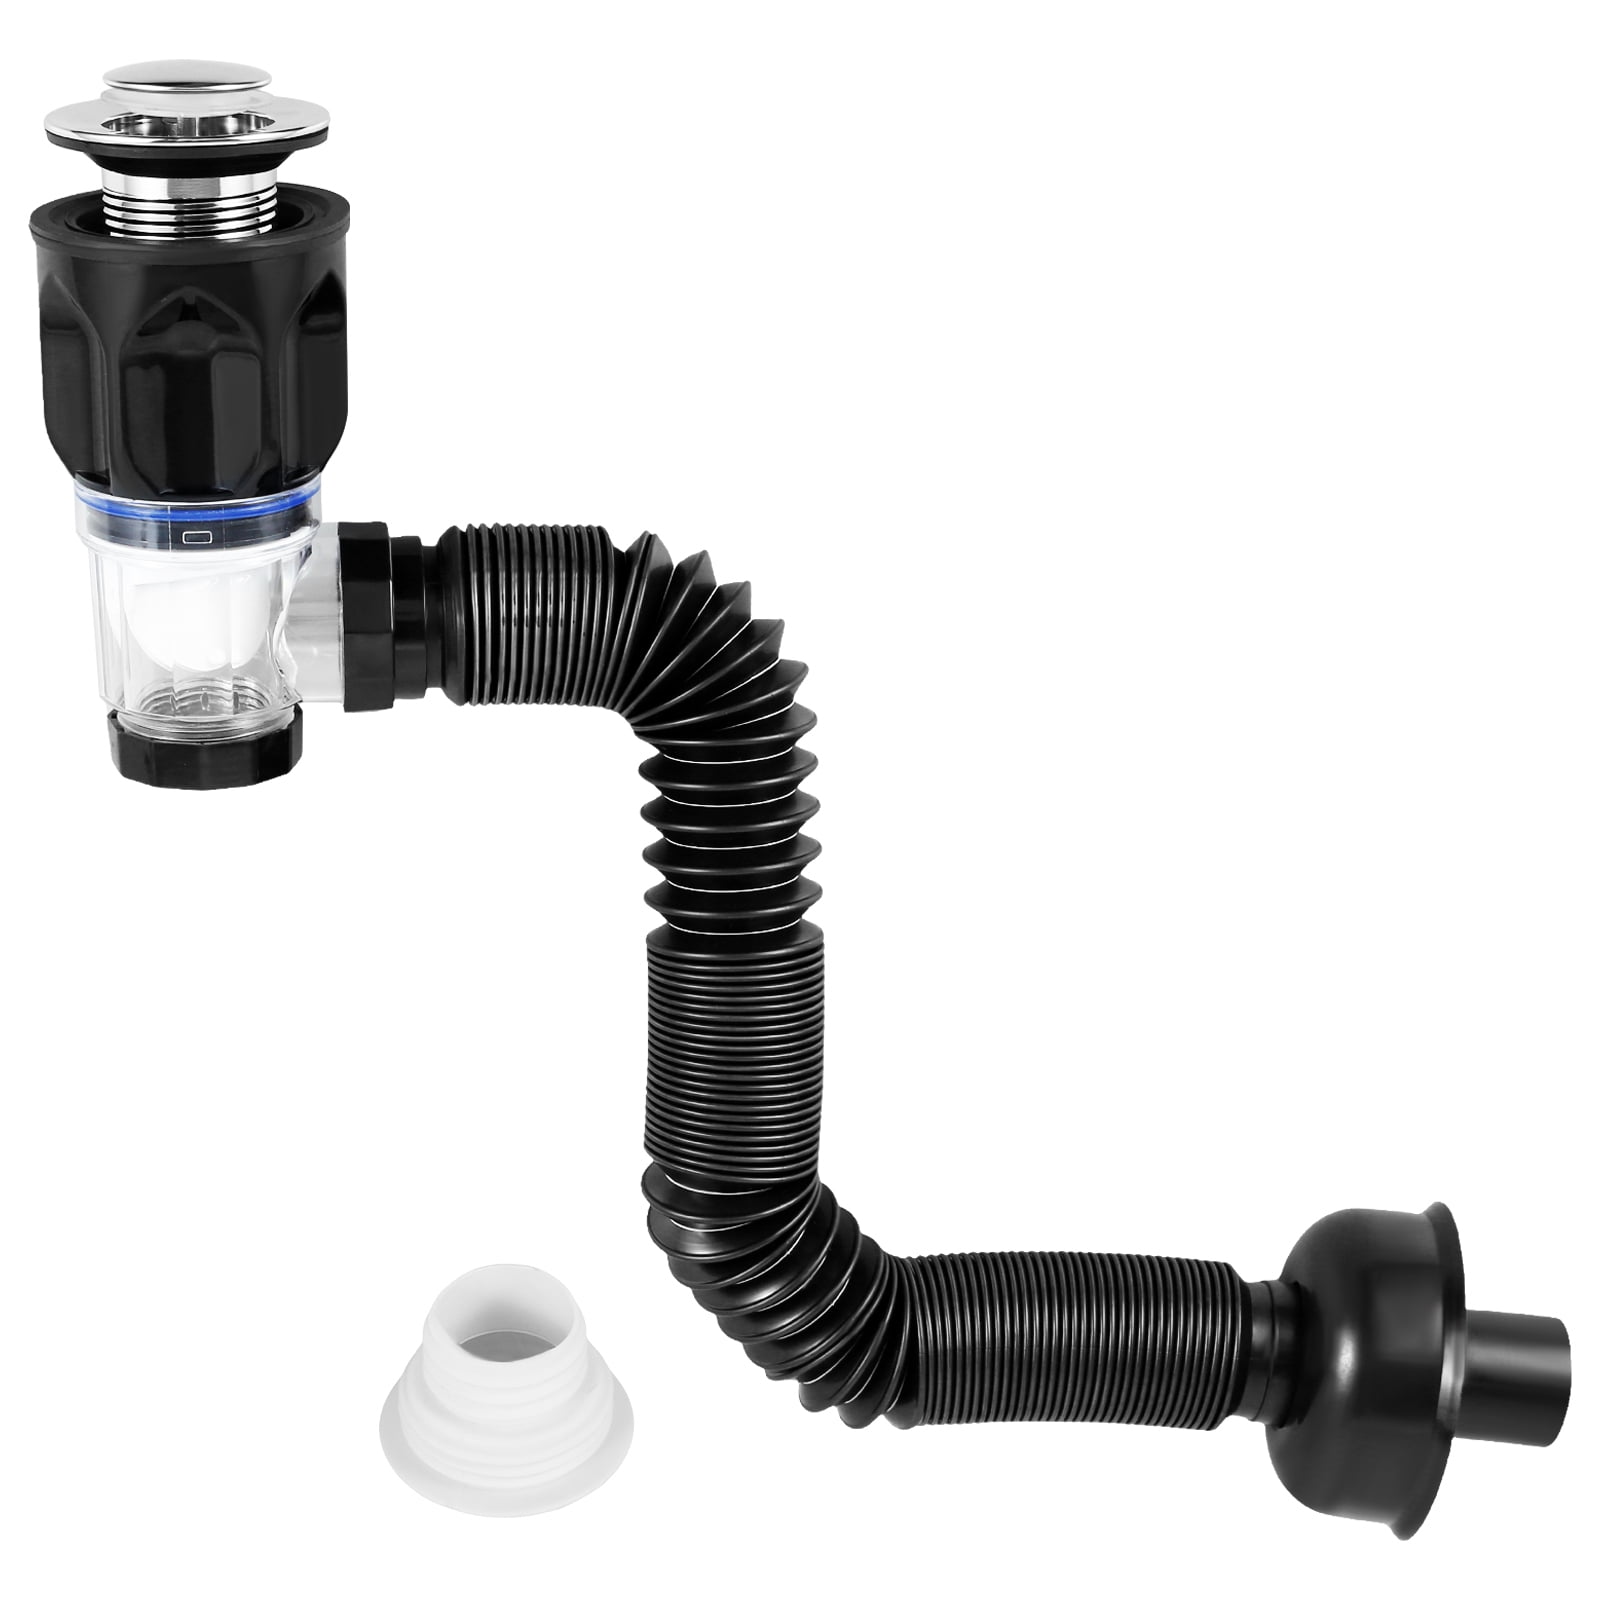 Drain Pipe Kit for Sink and Sink, Siphon Sink Kit, Flexible Drain Hose and  Pop-Up Filter Drain Plug, Odour-Proof Insect Drainage Kits, 300-1000 mm Can